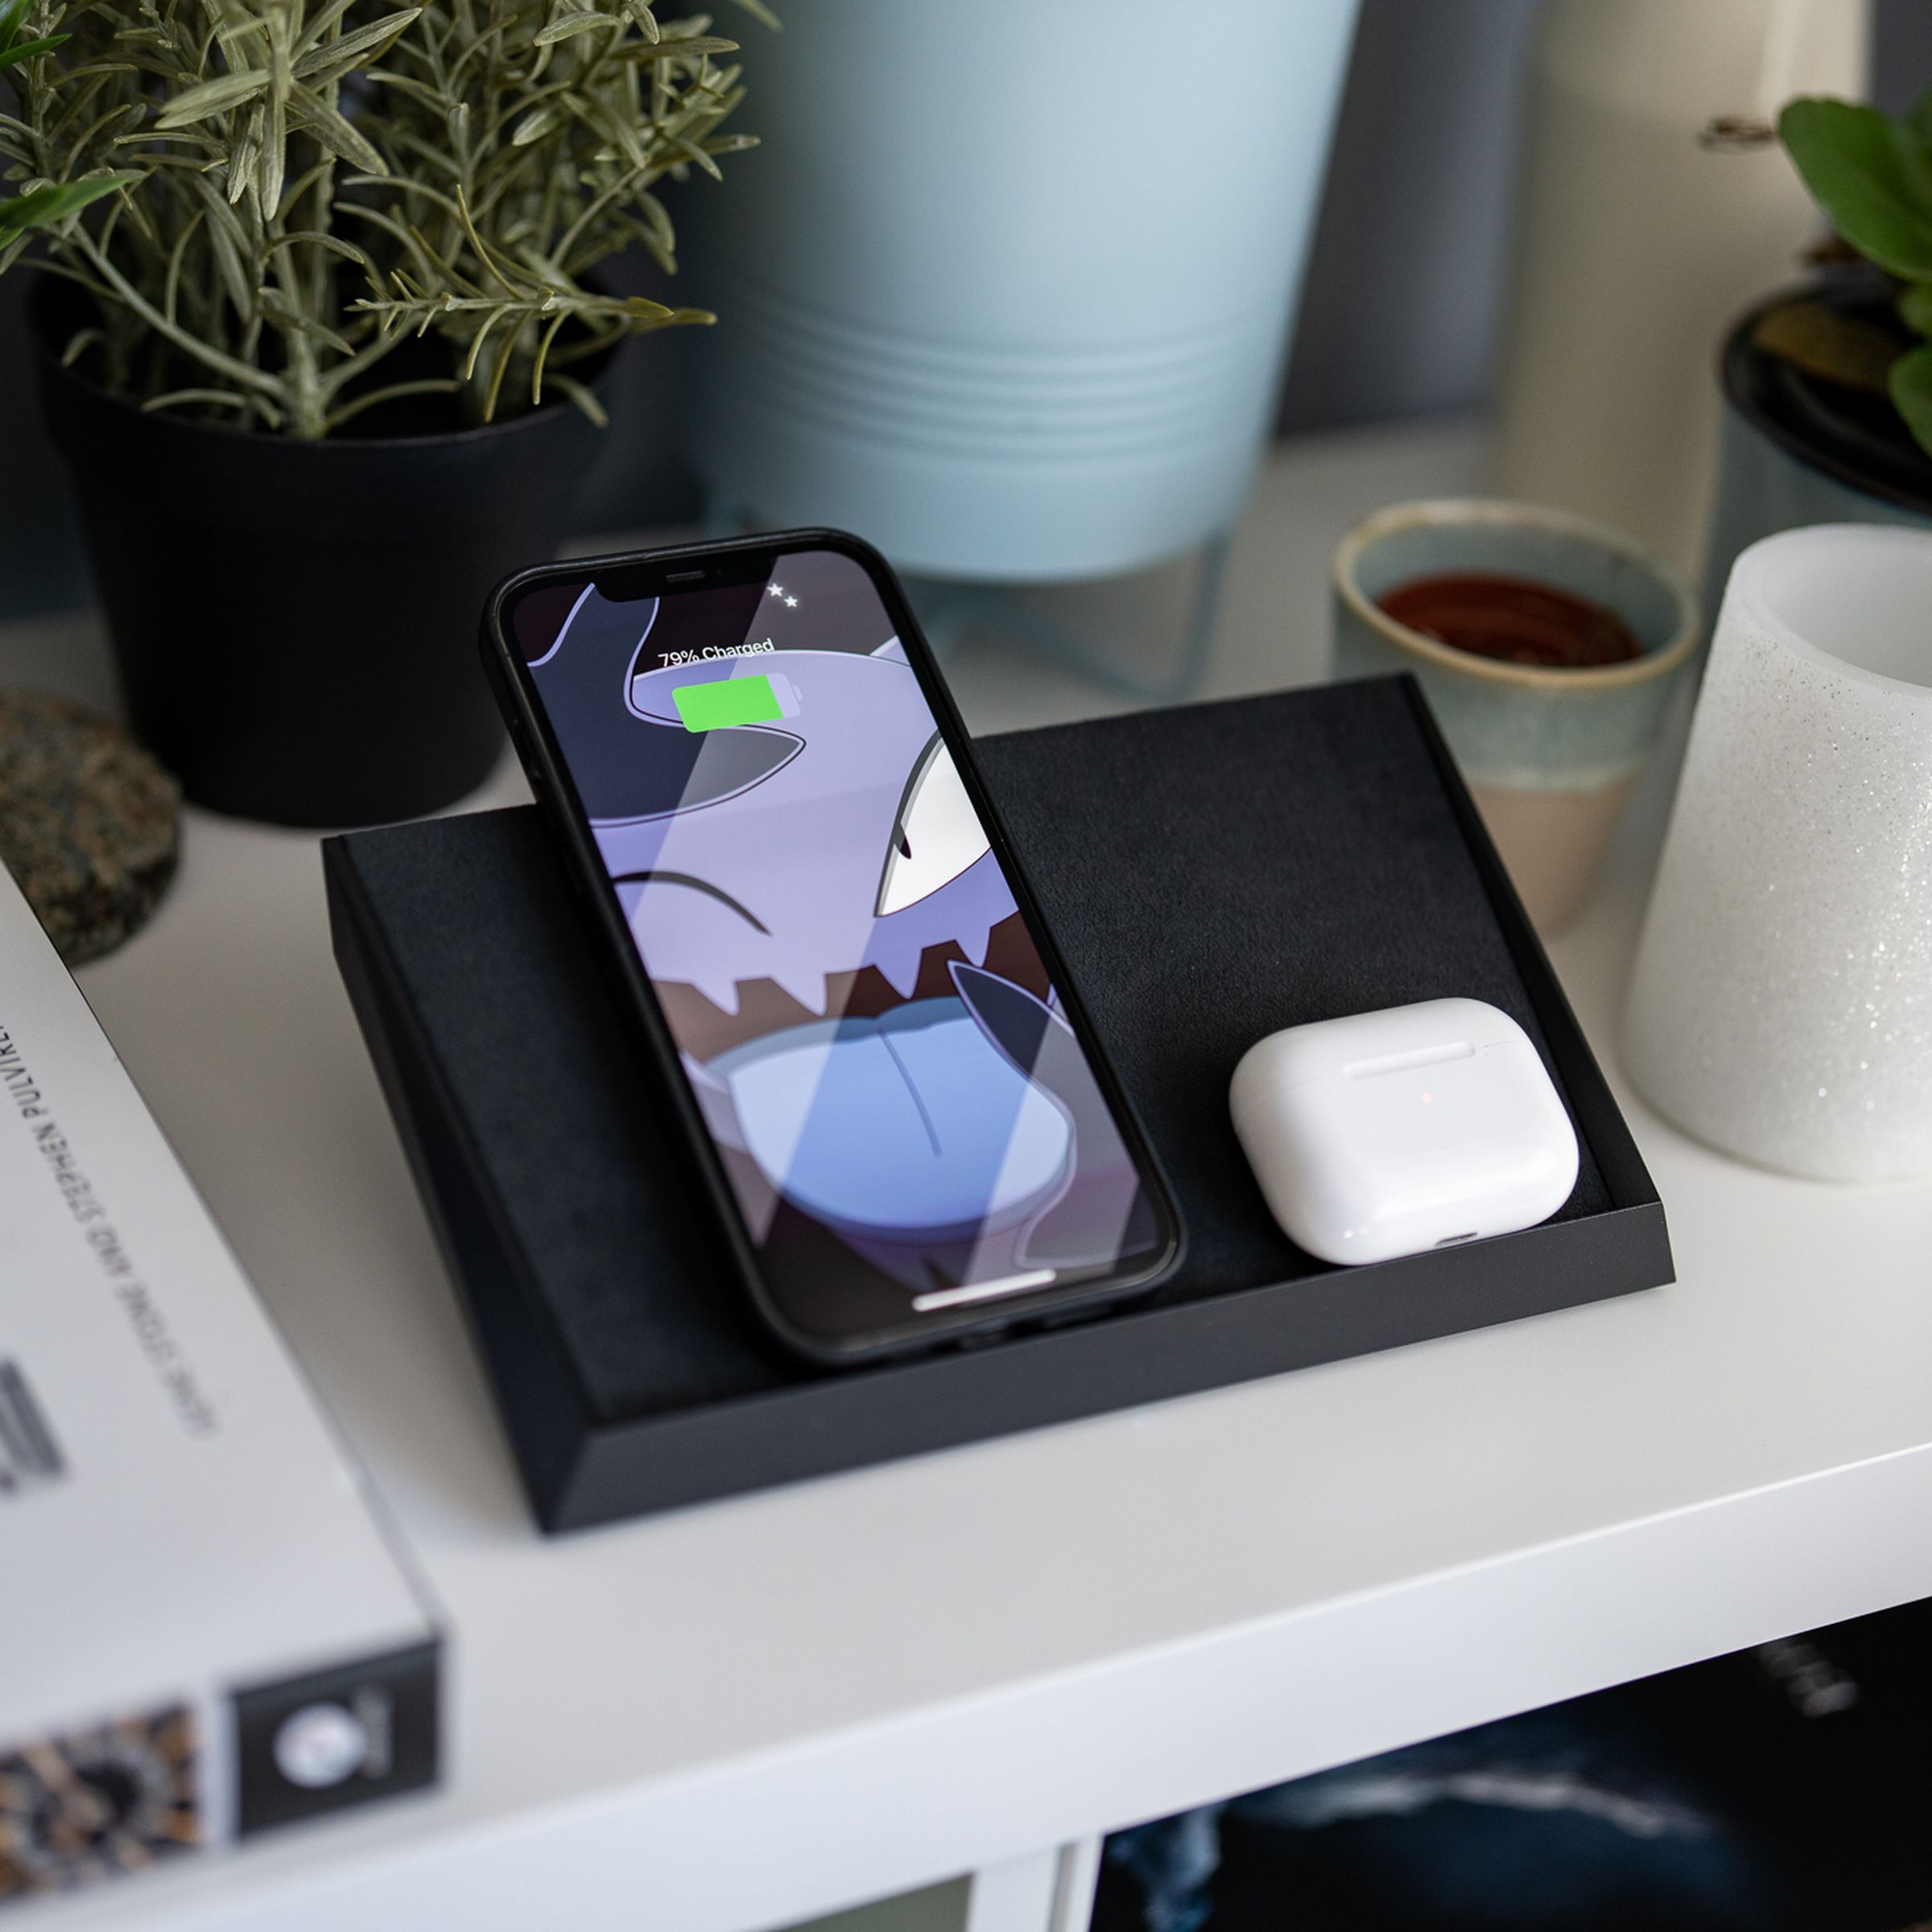 An iPhone and AirPods Pro case charging on Tesla’s wireless charging mat, sitting on a white end table.